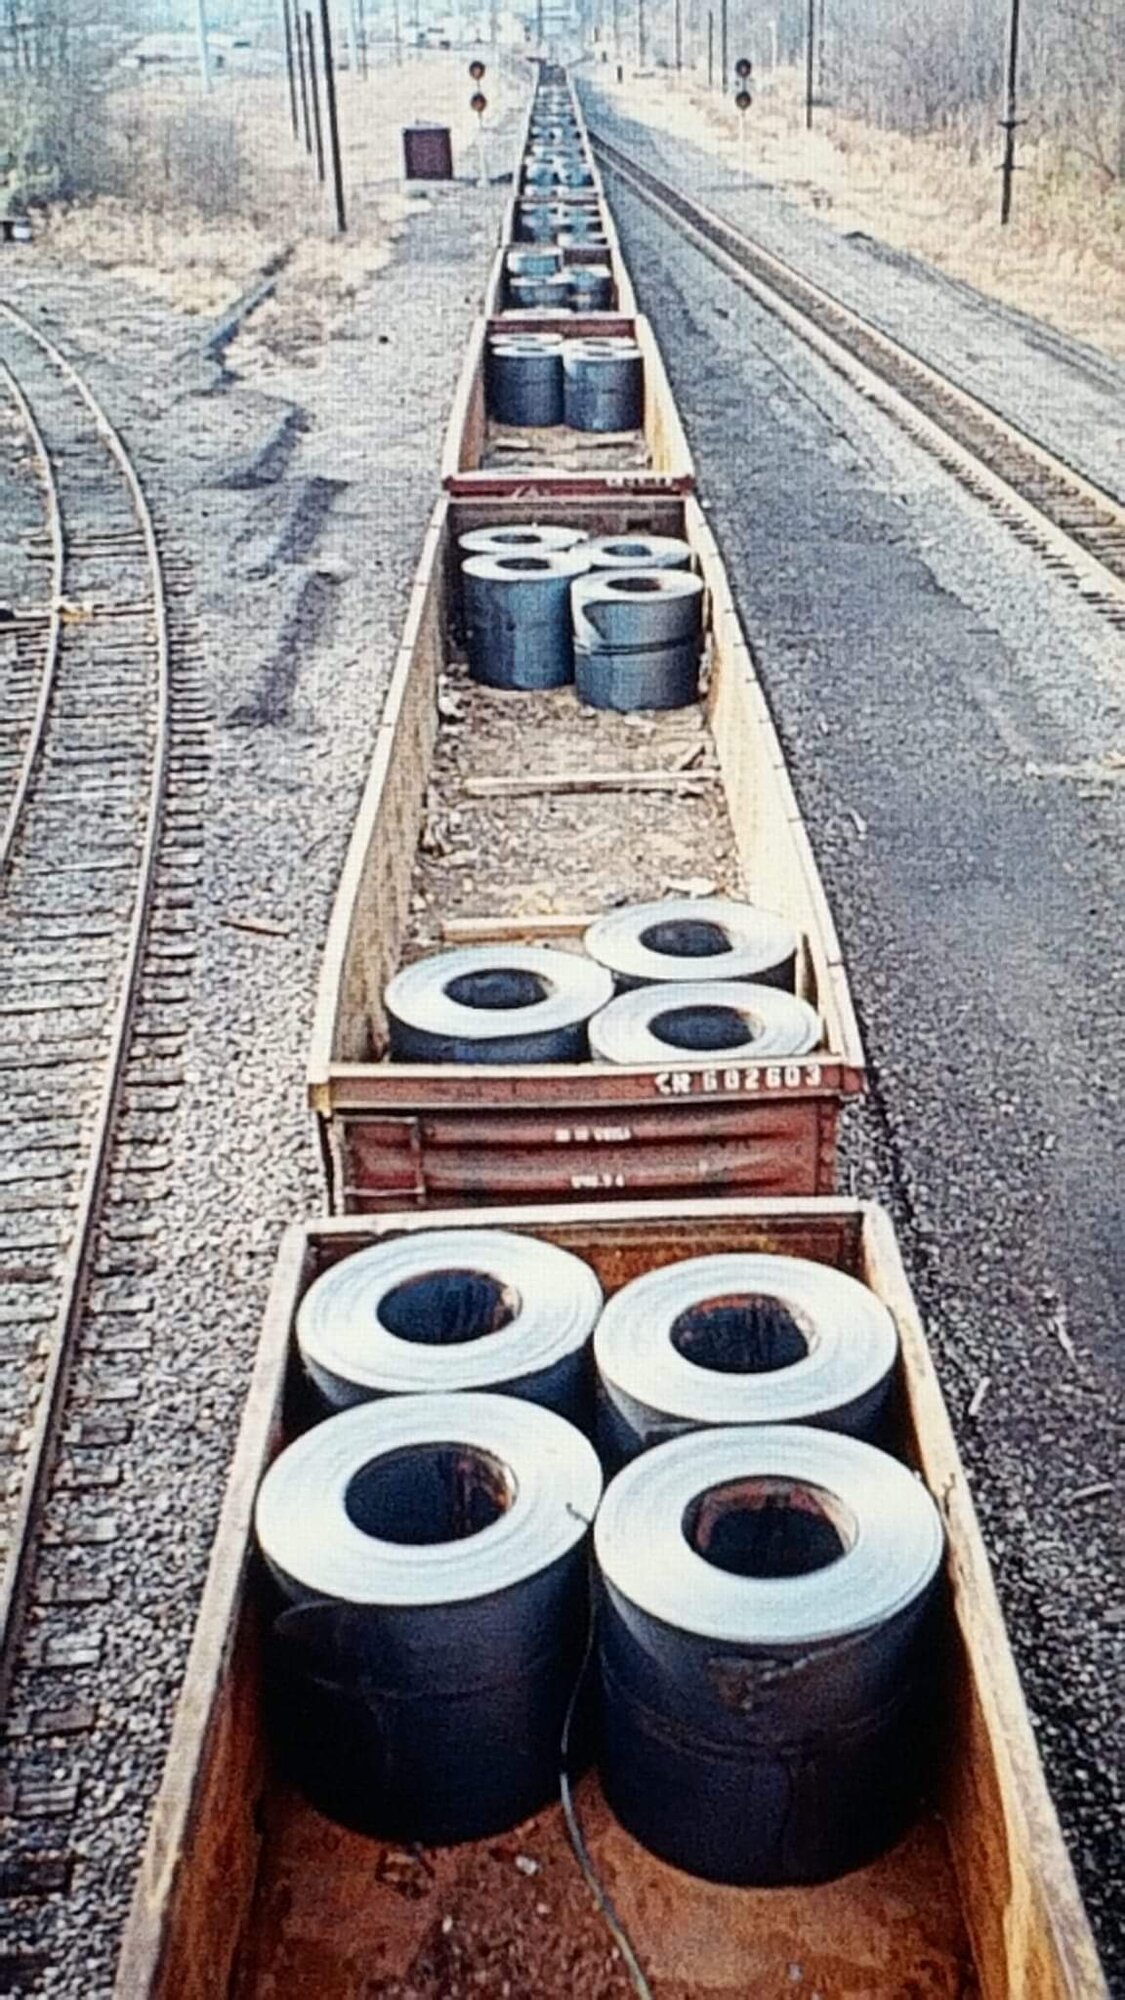 Conrail Coil loads at  Plymouth Meeting, PA 1990s - Allen Wood Steel.jpg